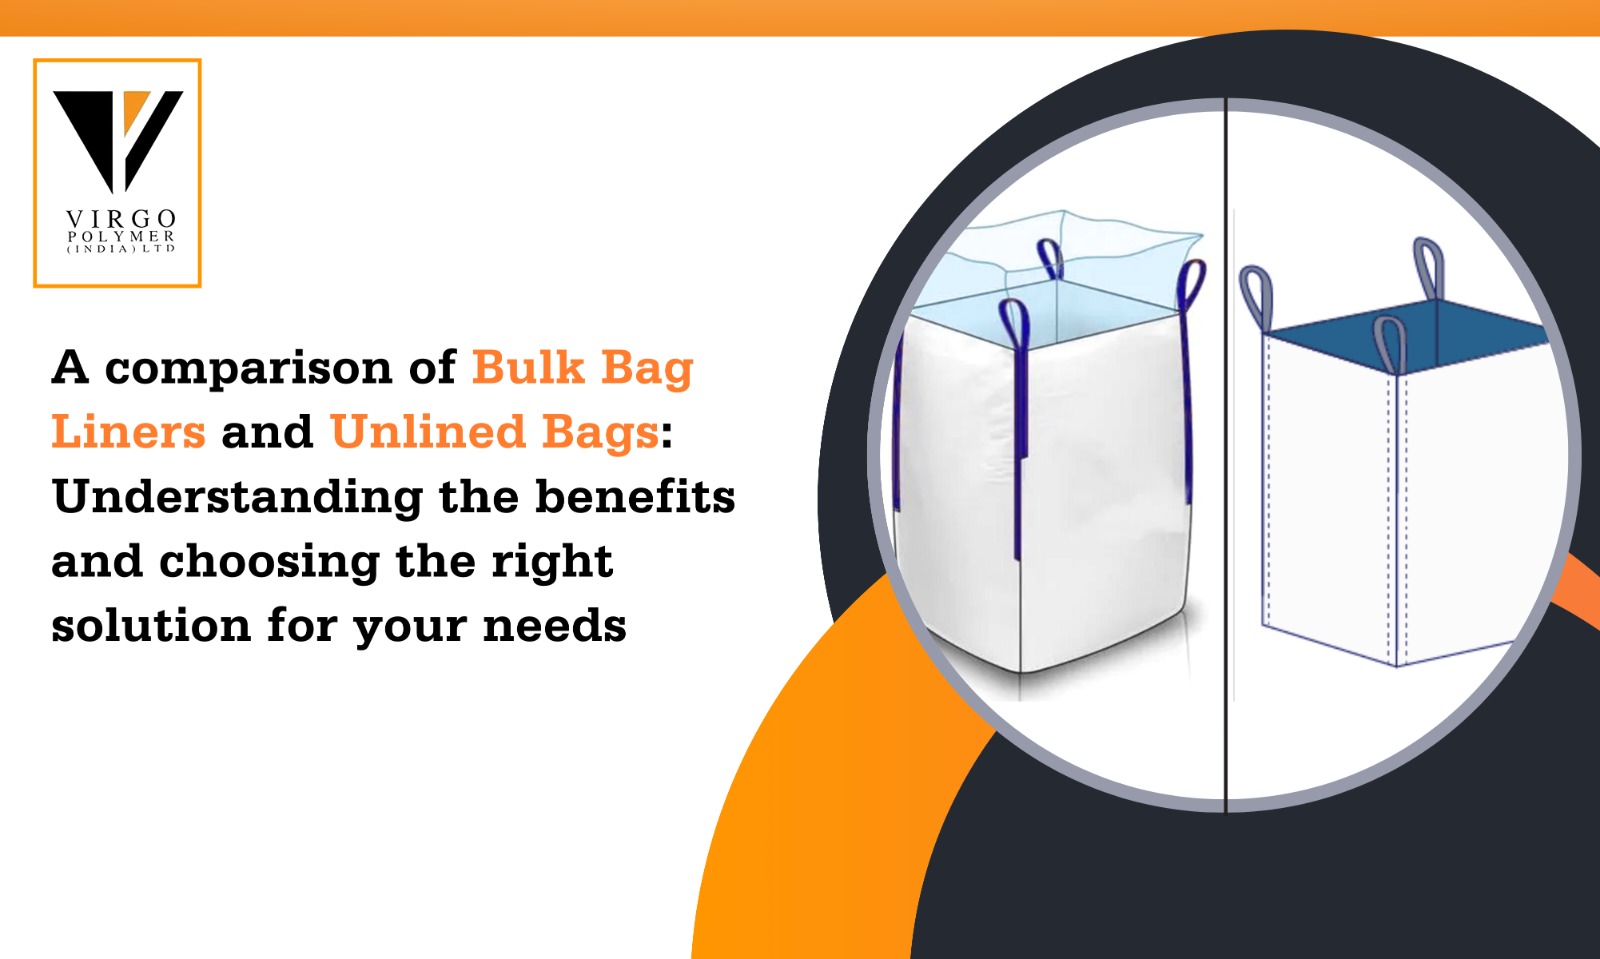 A comparison of Bulk Bag Liners and Unlined Bags